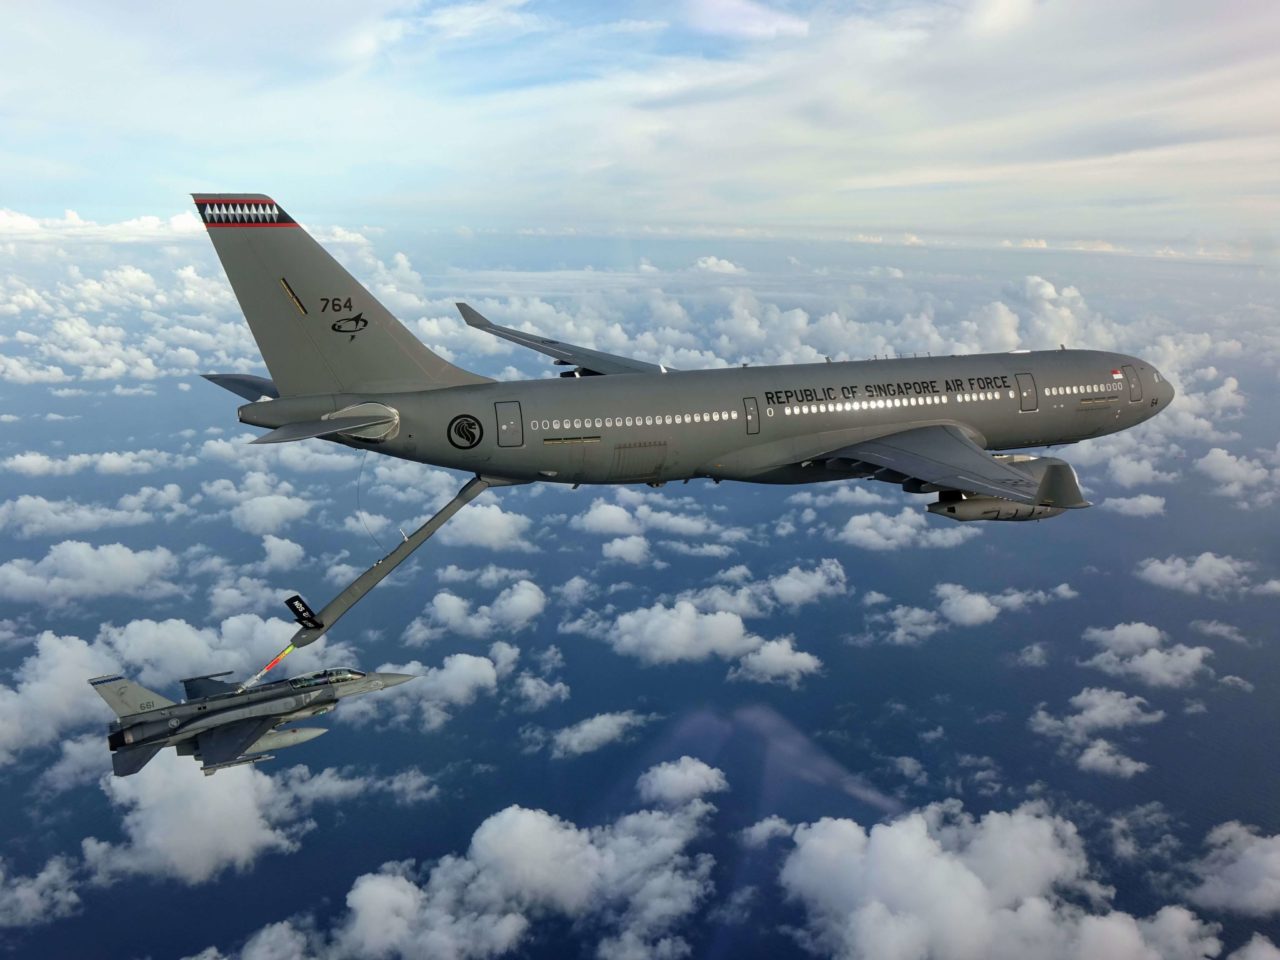 A330 MRTT first tanker certified for automatic air-to-air refuelling